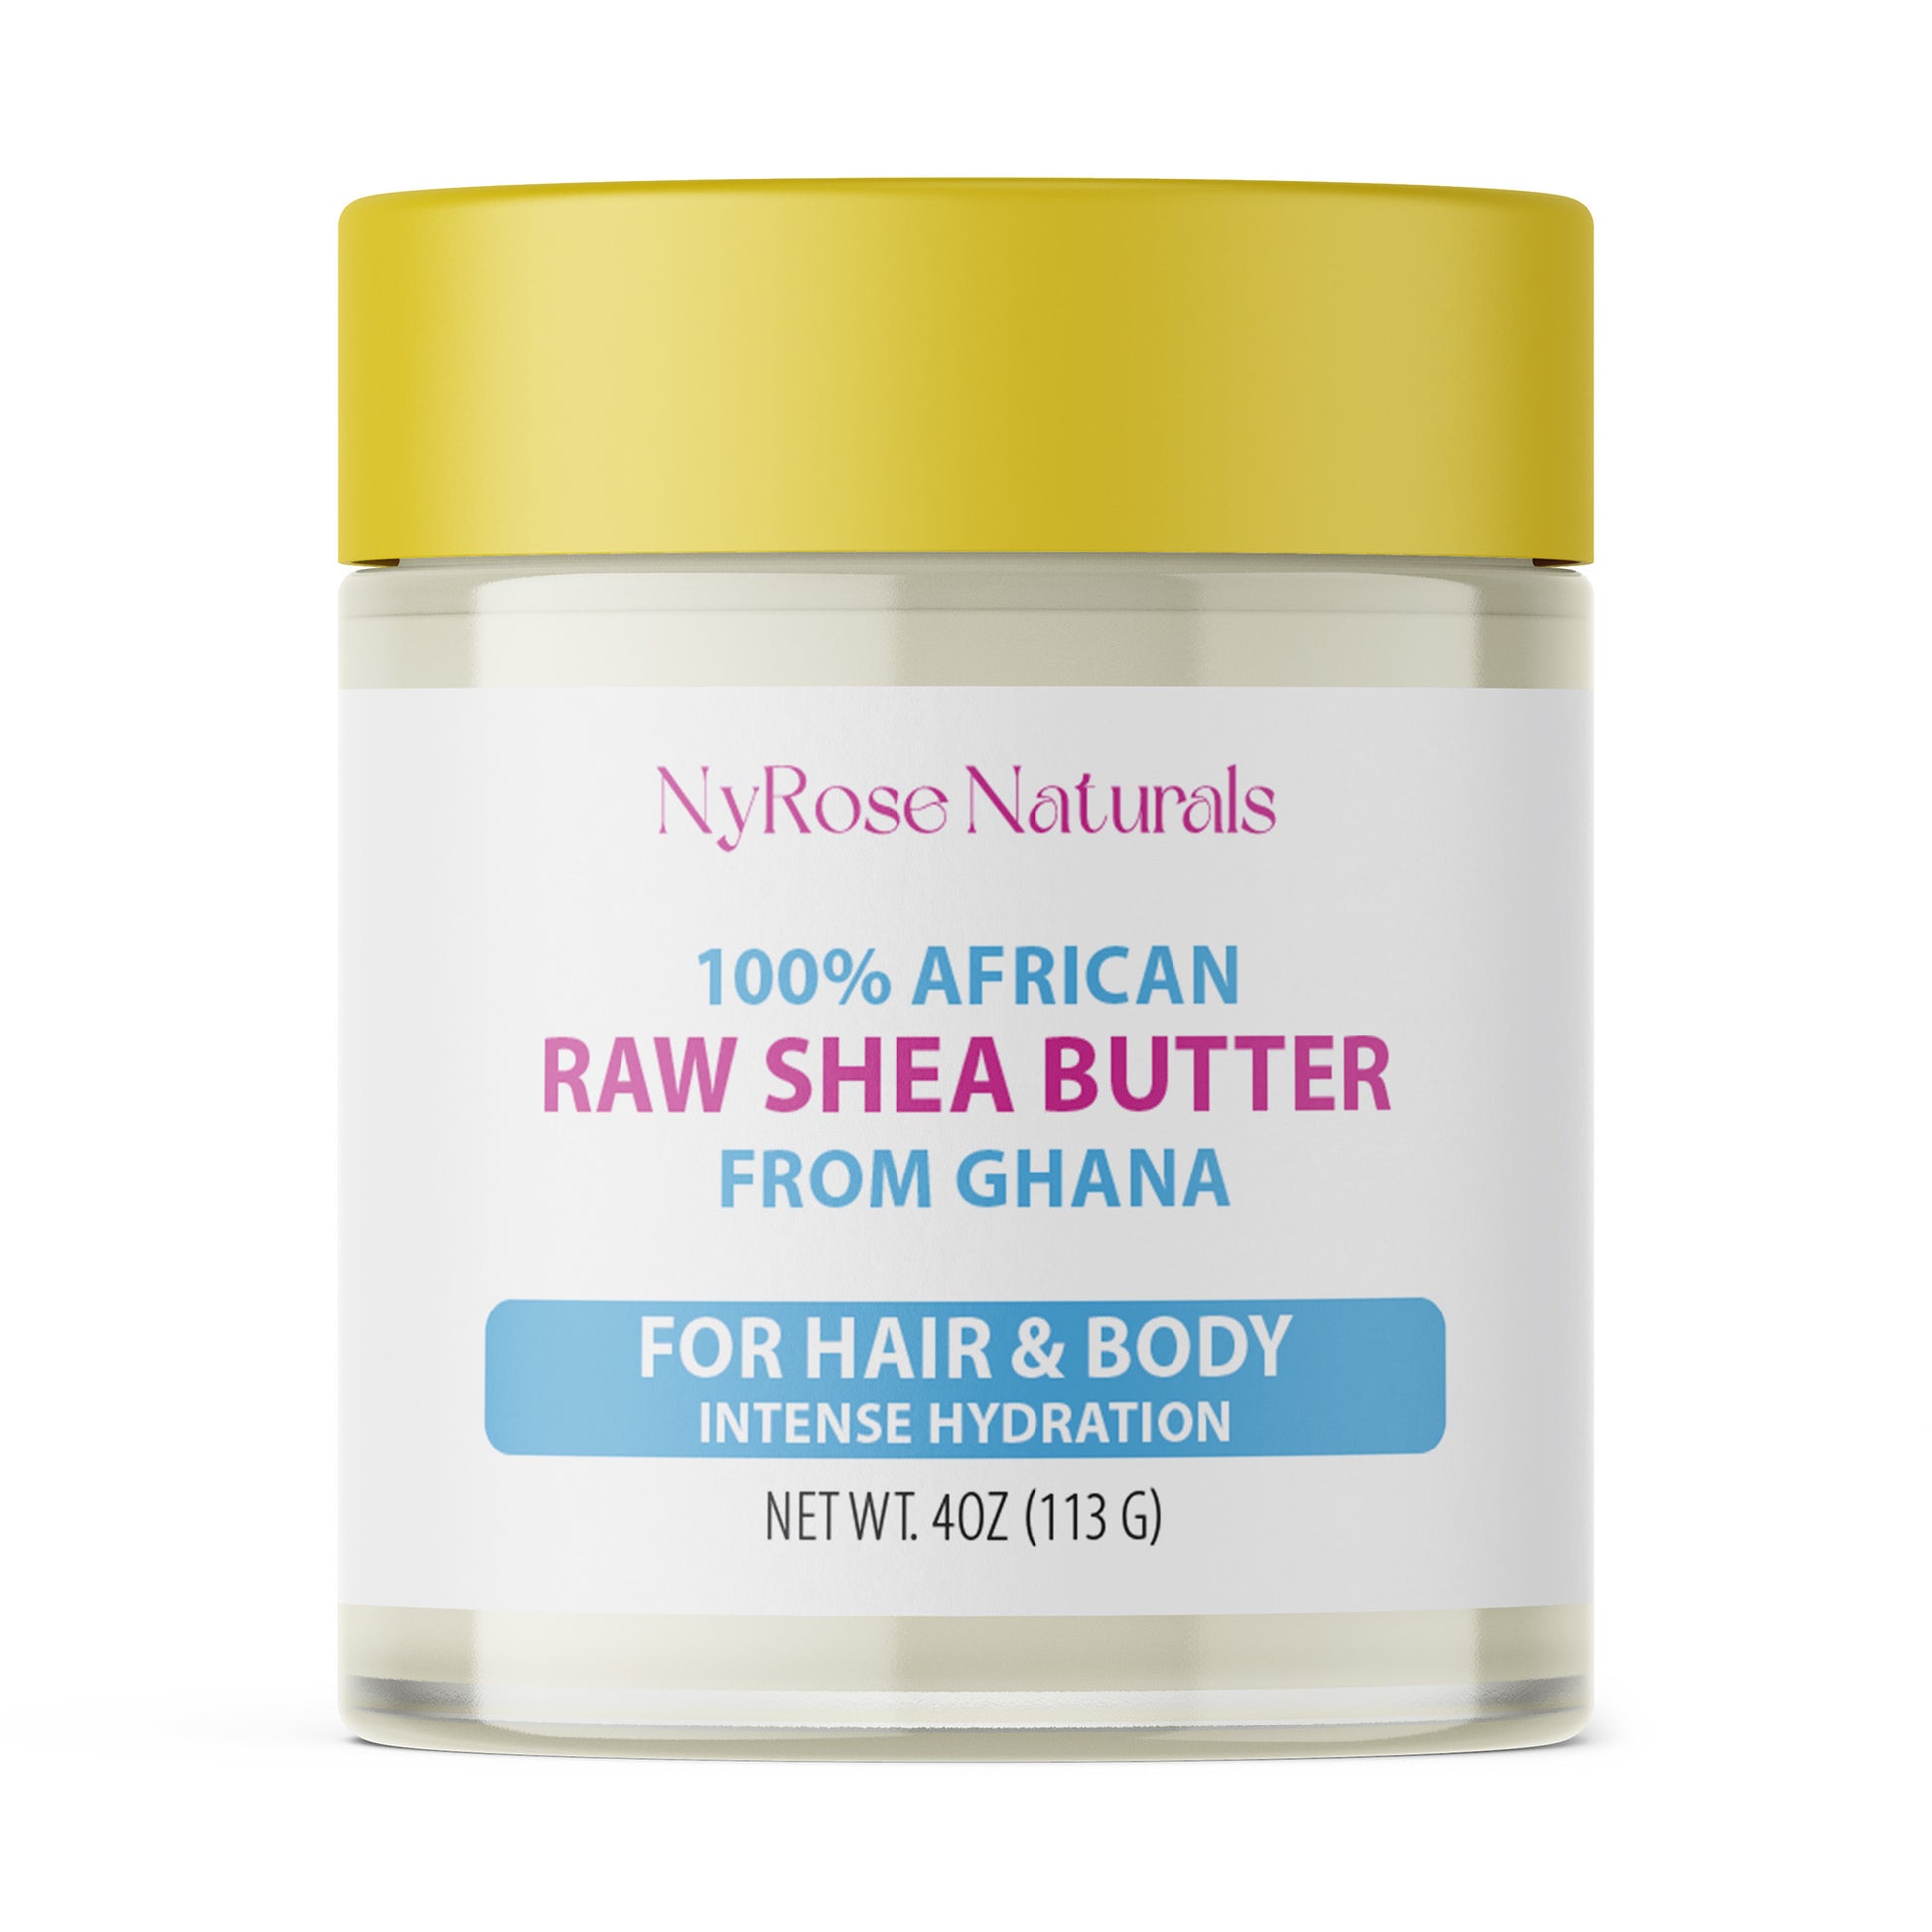 PRE-ORDER 100% African Raw Shea Butter from Ghana - NyRose Naturals